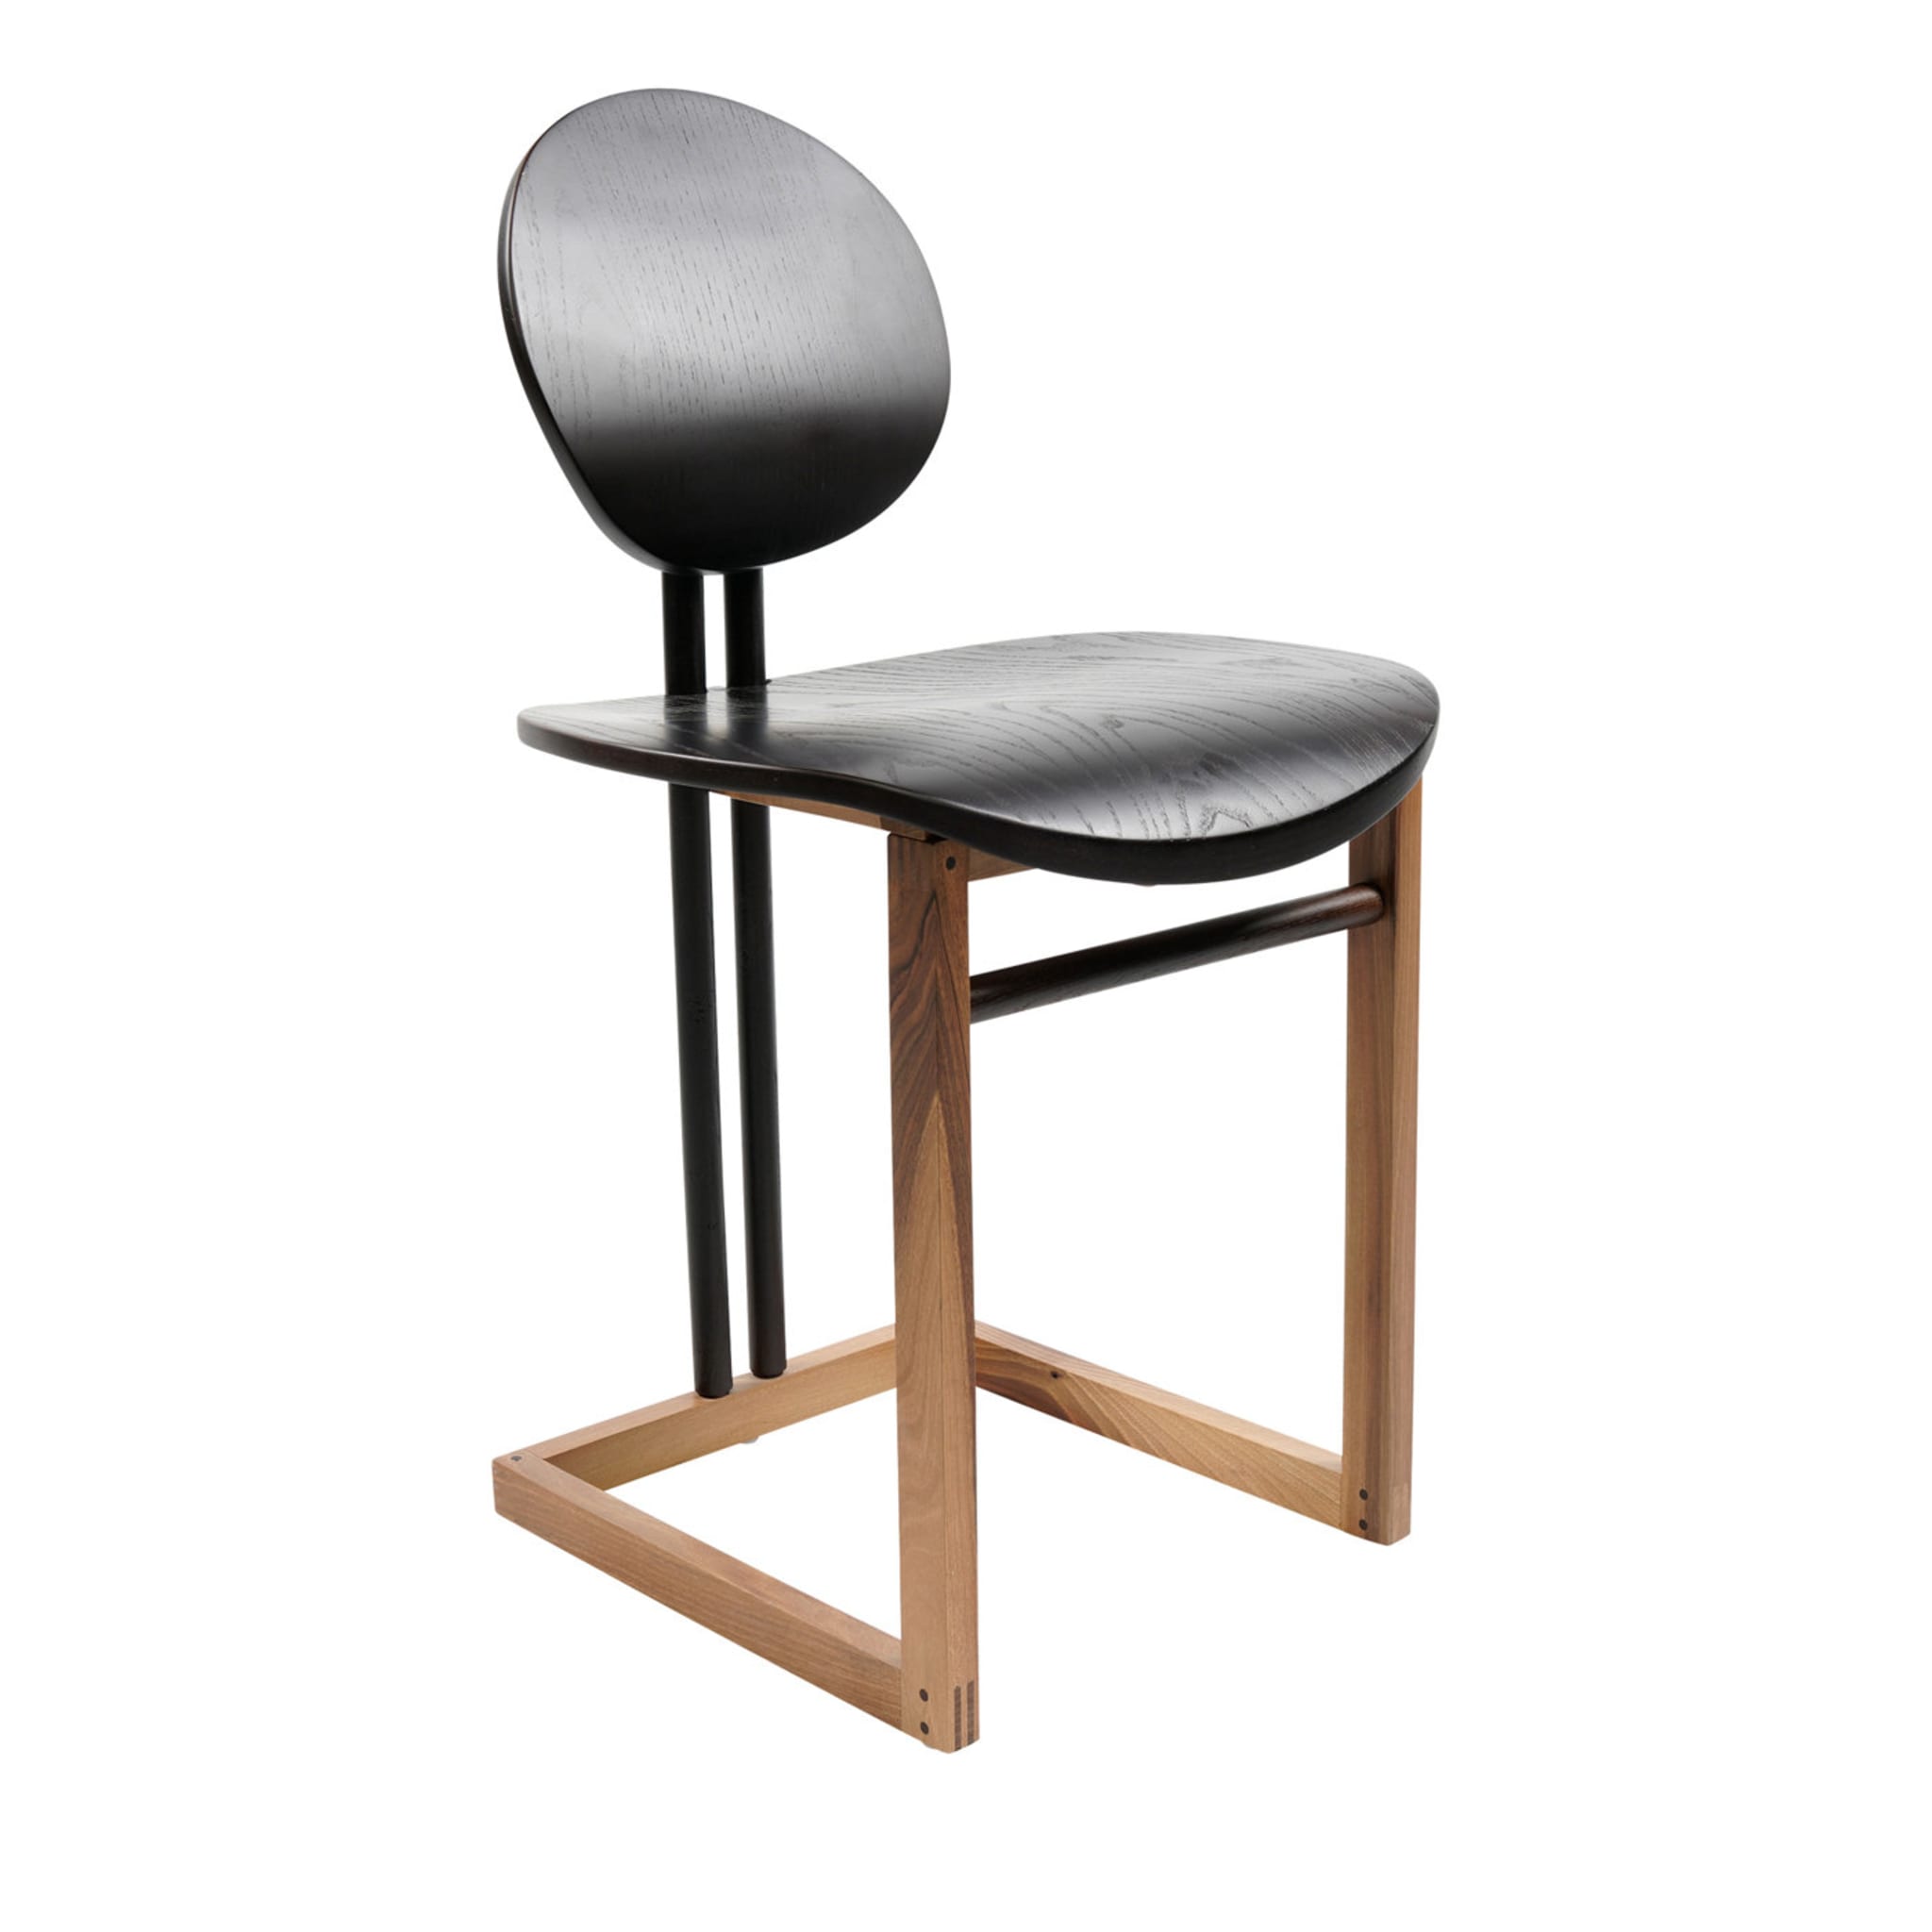 Luna dining chair - Main view